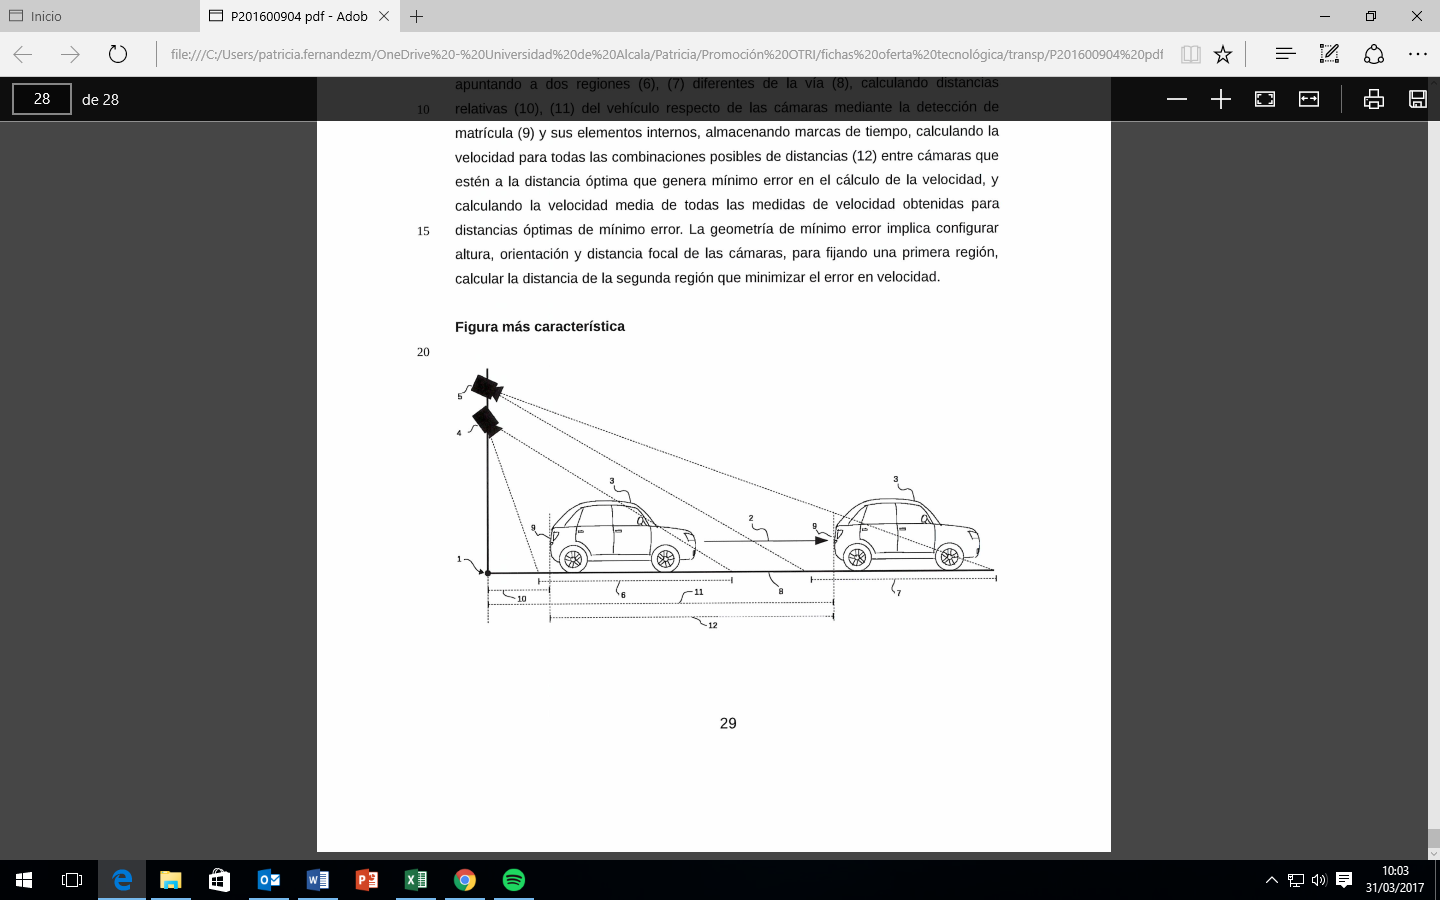 Procedure for measuring the speed of motor vehicles in the short section, with minimum error geometry, using 2 cameras and artific[…]